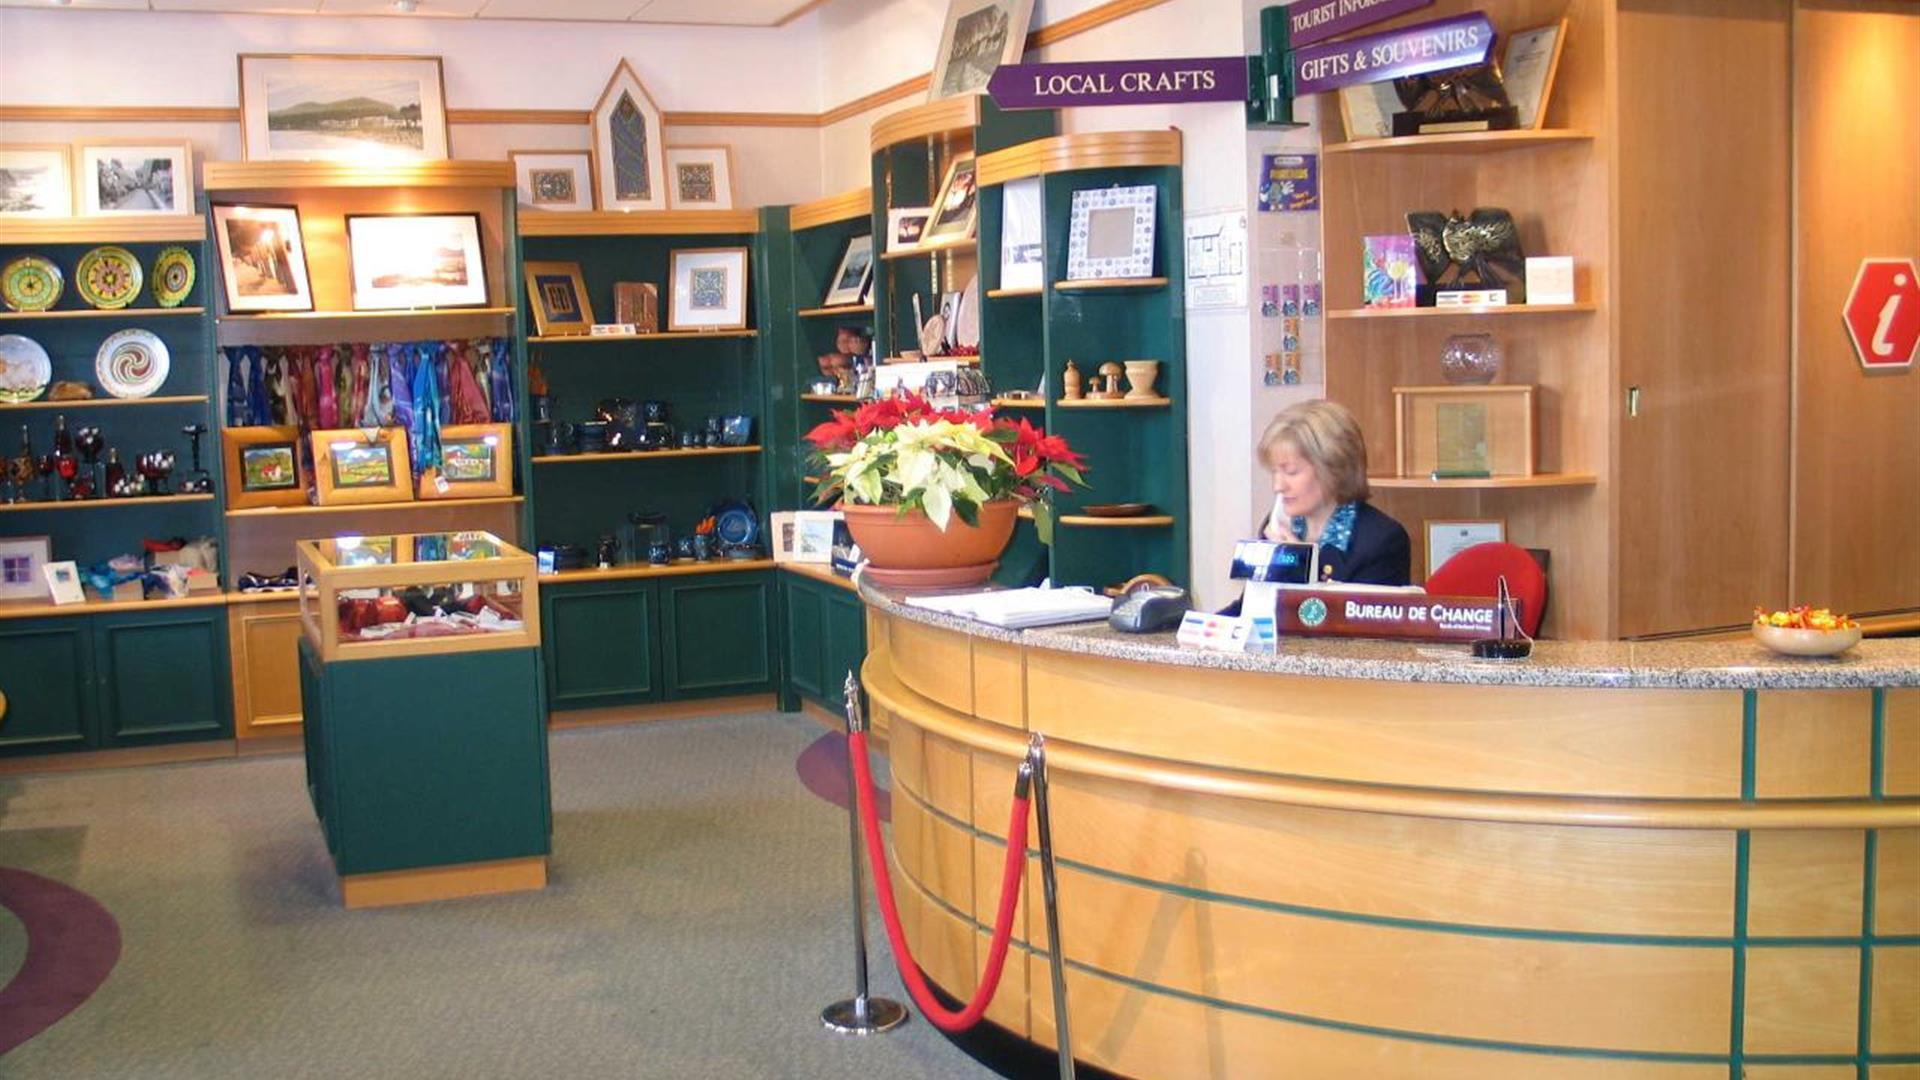 Newcastle Visitor Information Centre